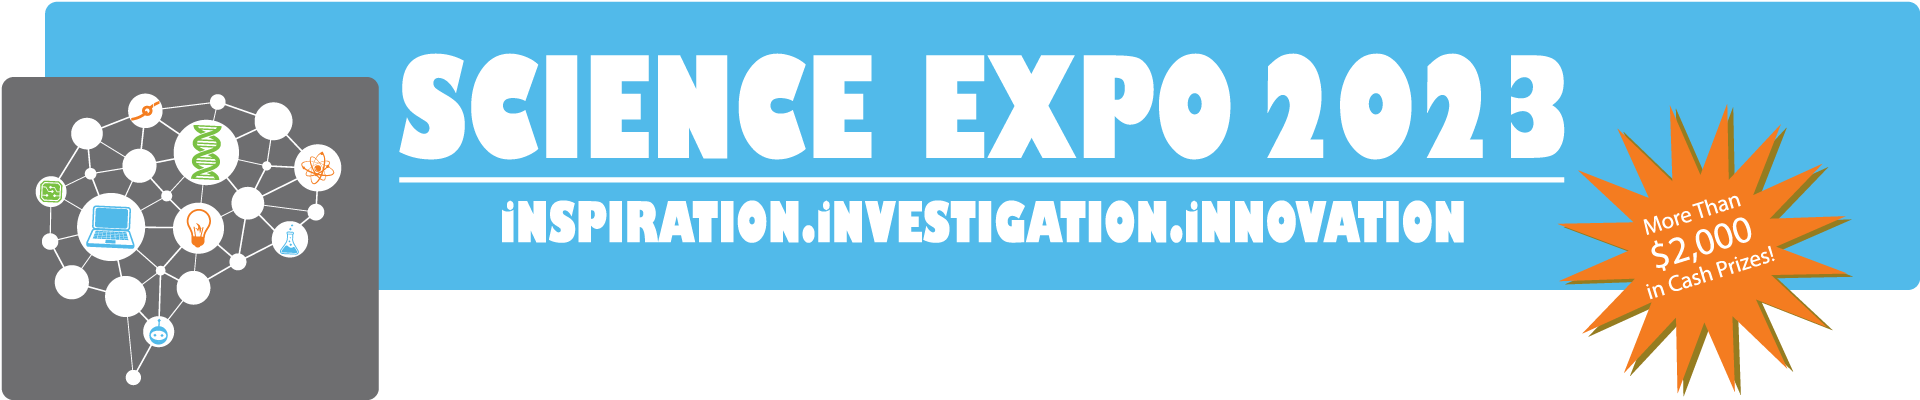 Science_Expo_Banner2_v3-01